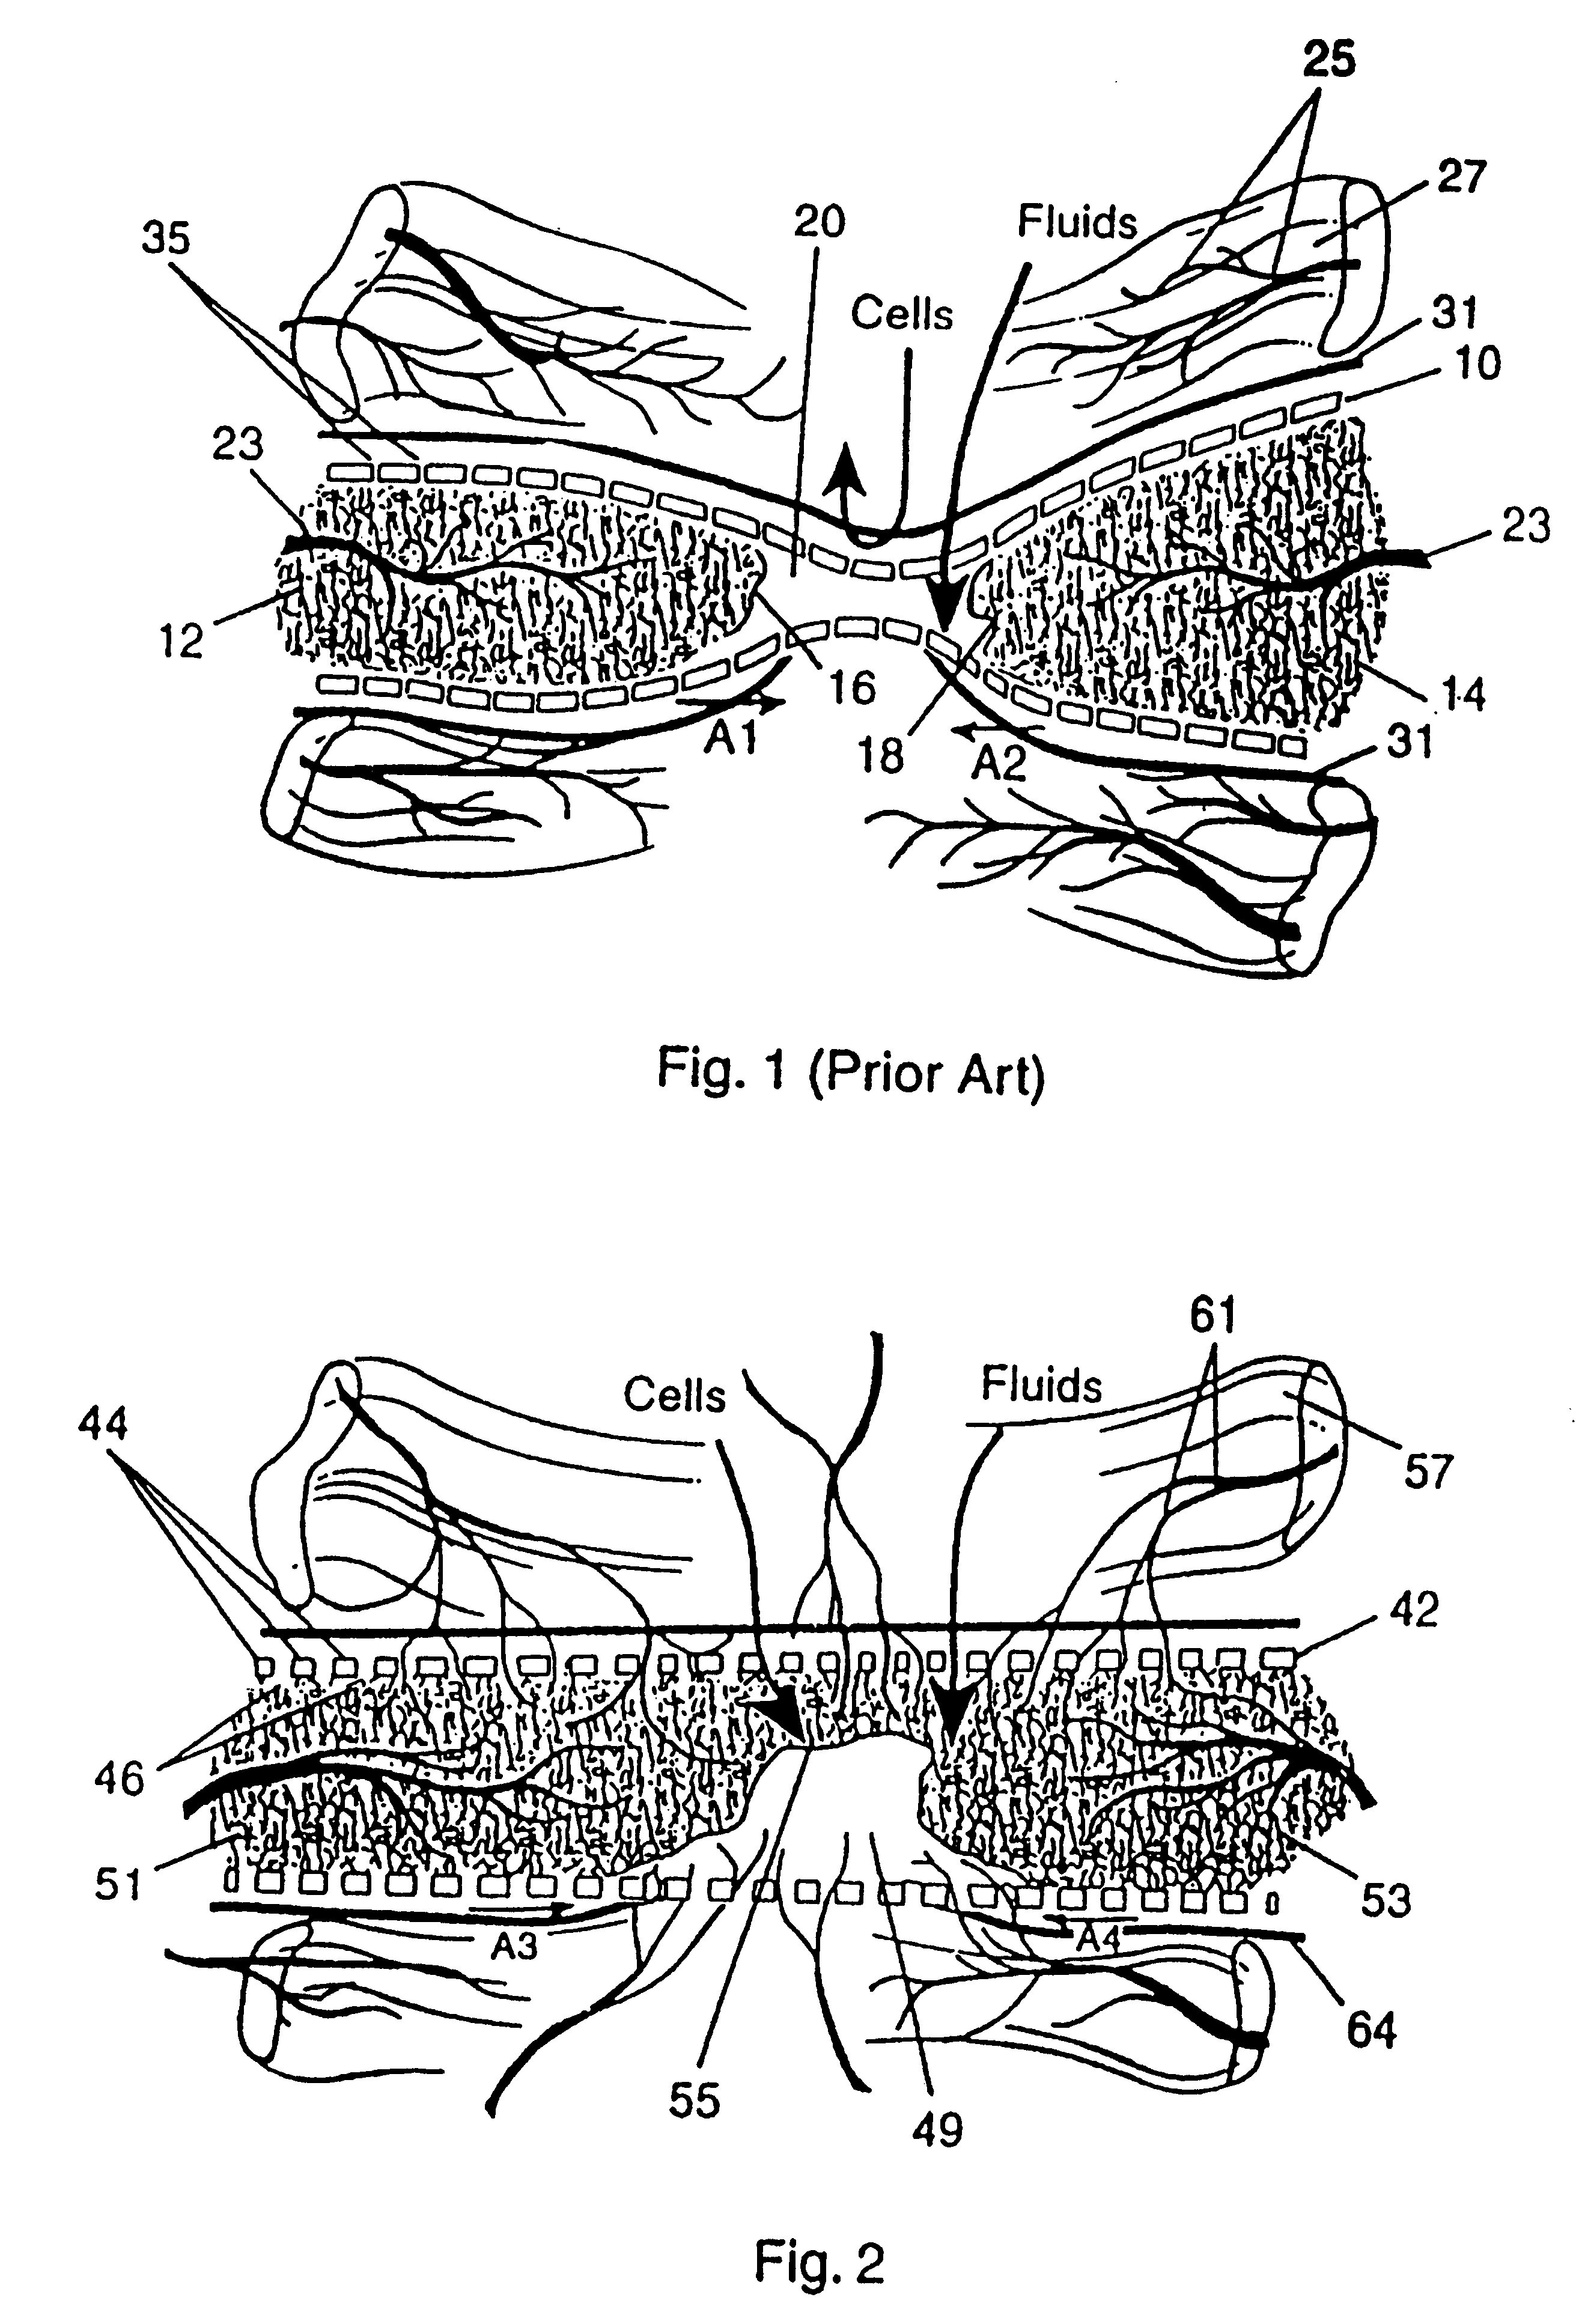 Membrane with tissue-guiding surface corrugations